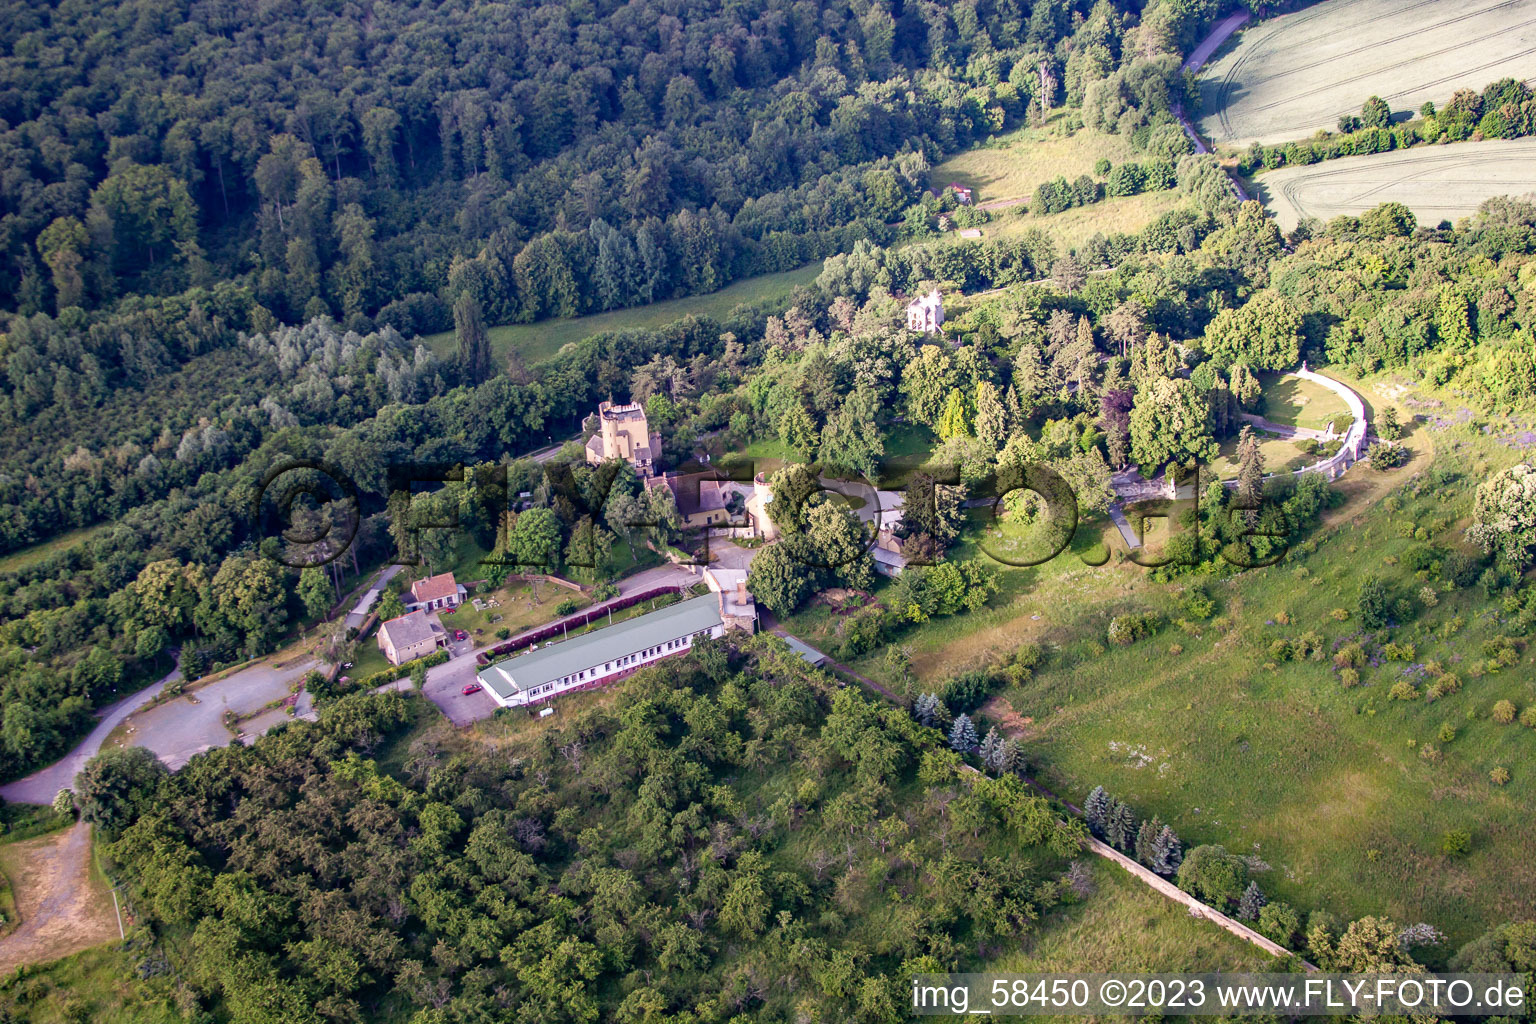 Aerial photograpy of District Rieder in Ballenstedt in the state Saxony-Anhalt, Germany